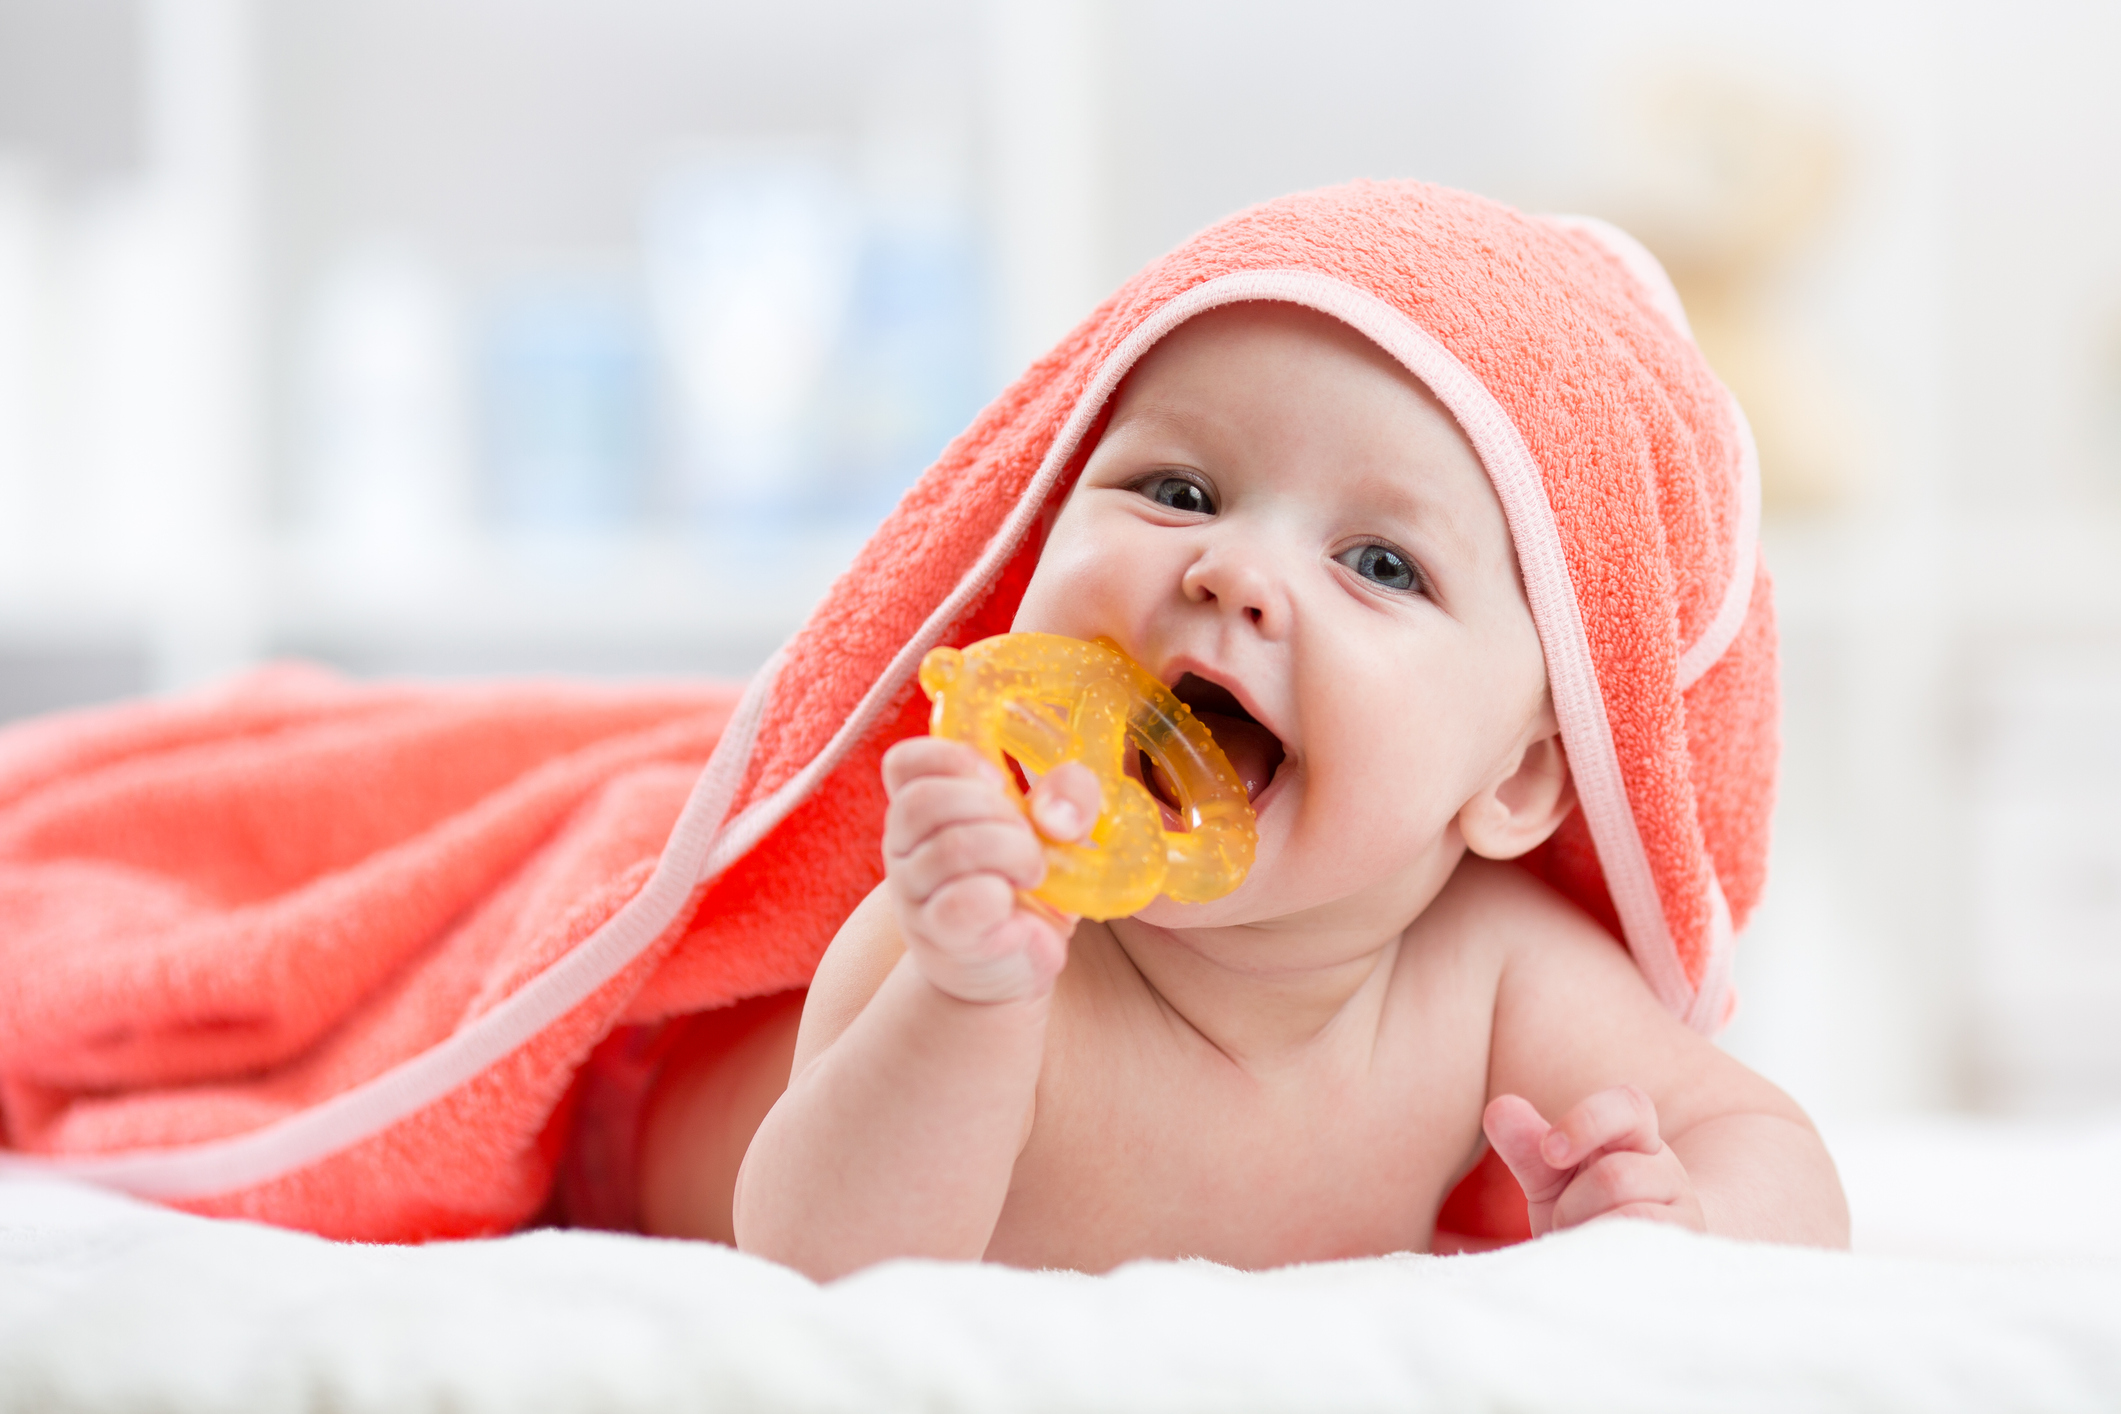 A baby covered in a towel chews on a teething toy